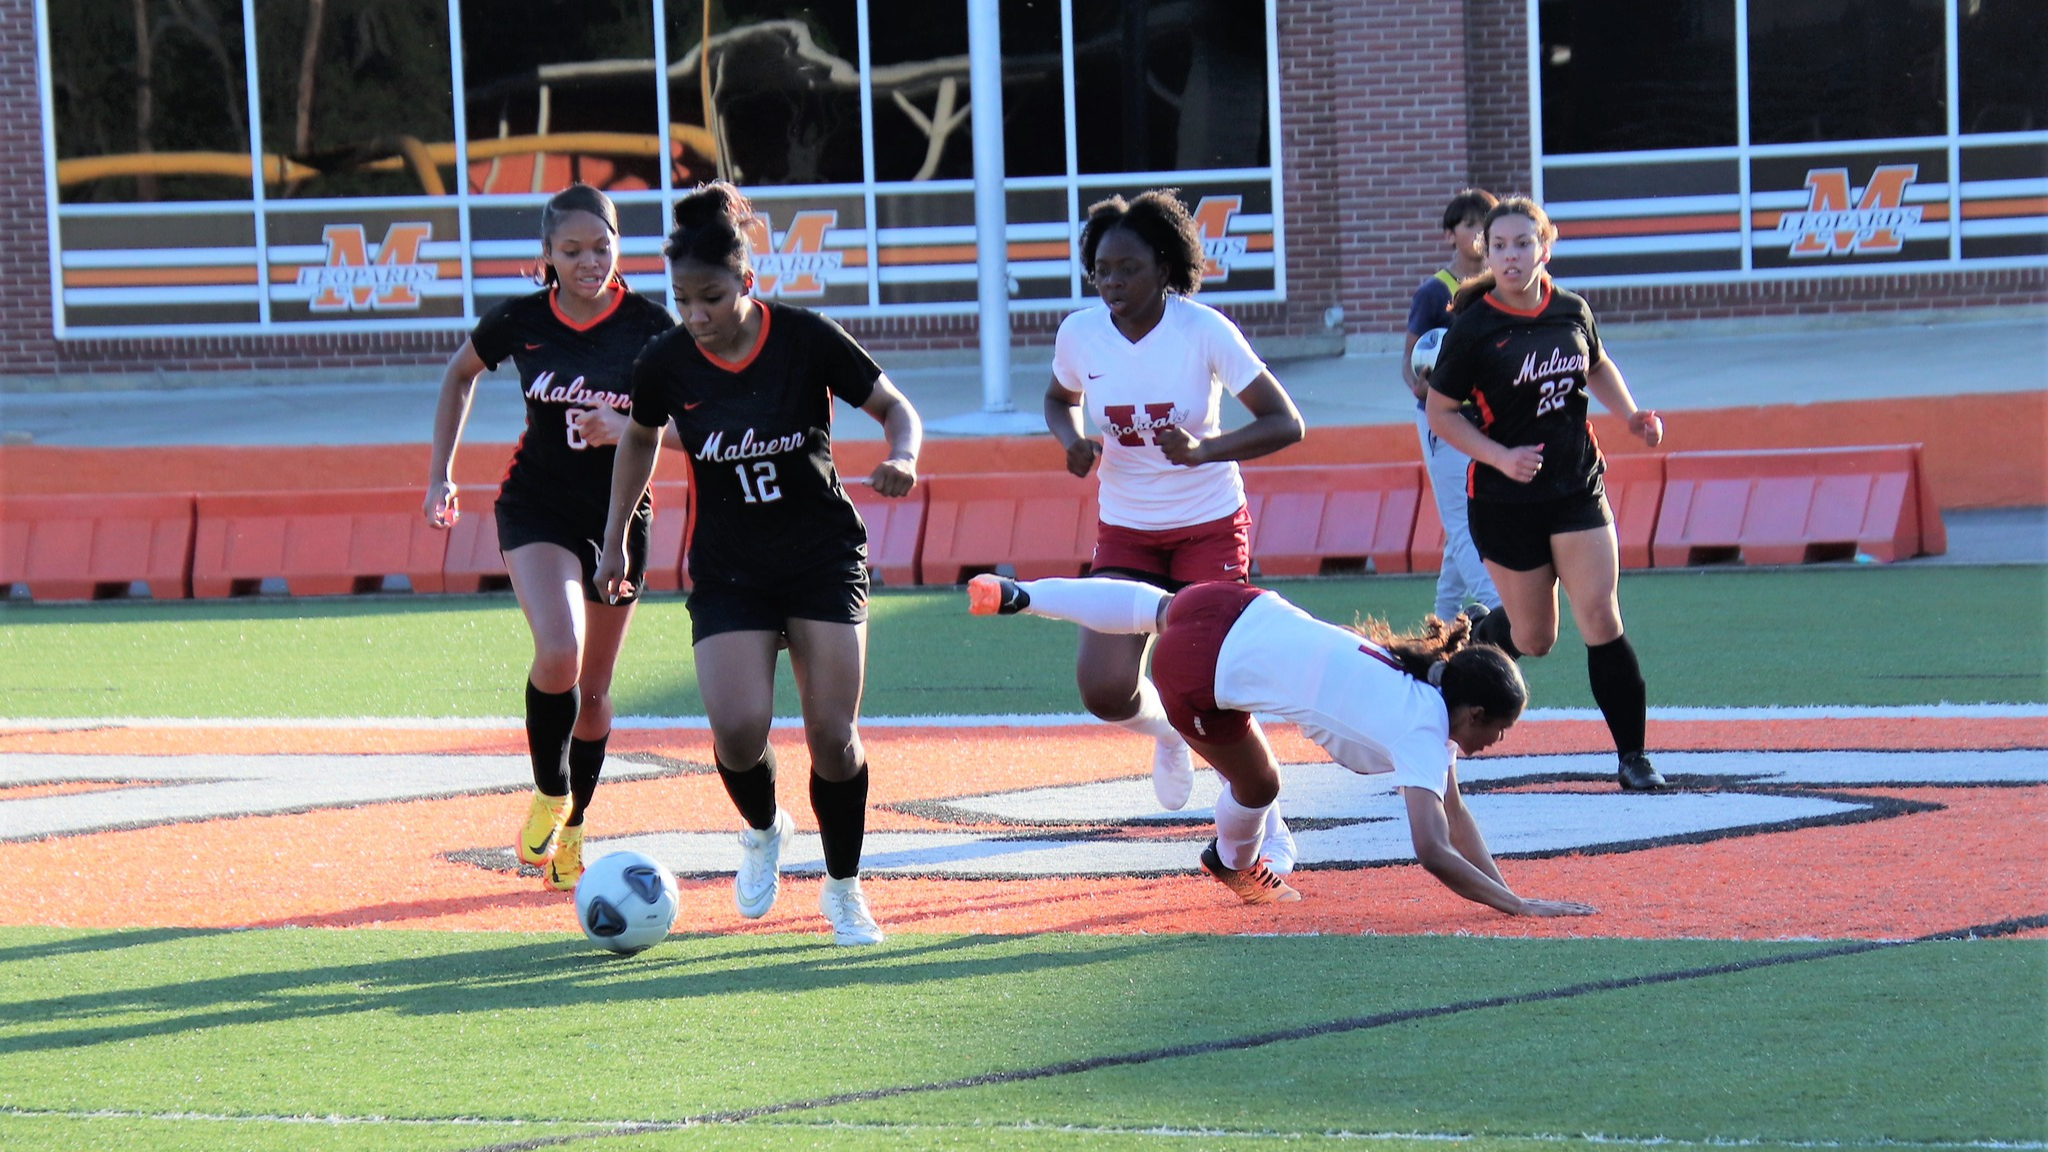 Girls Soccer Team in Action during a game